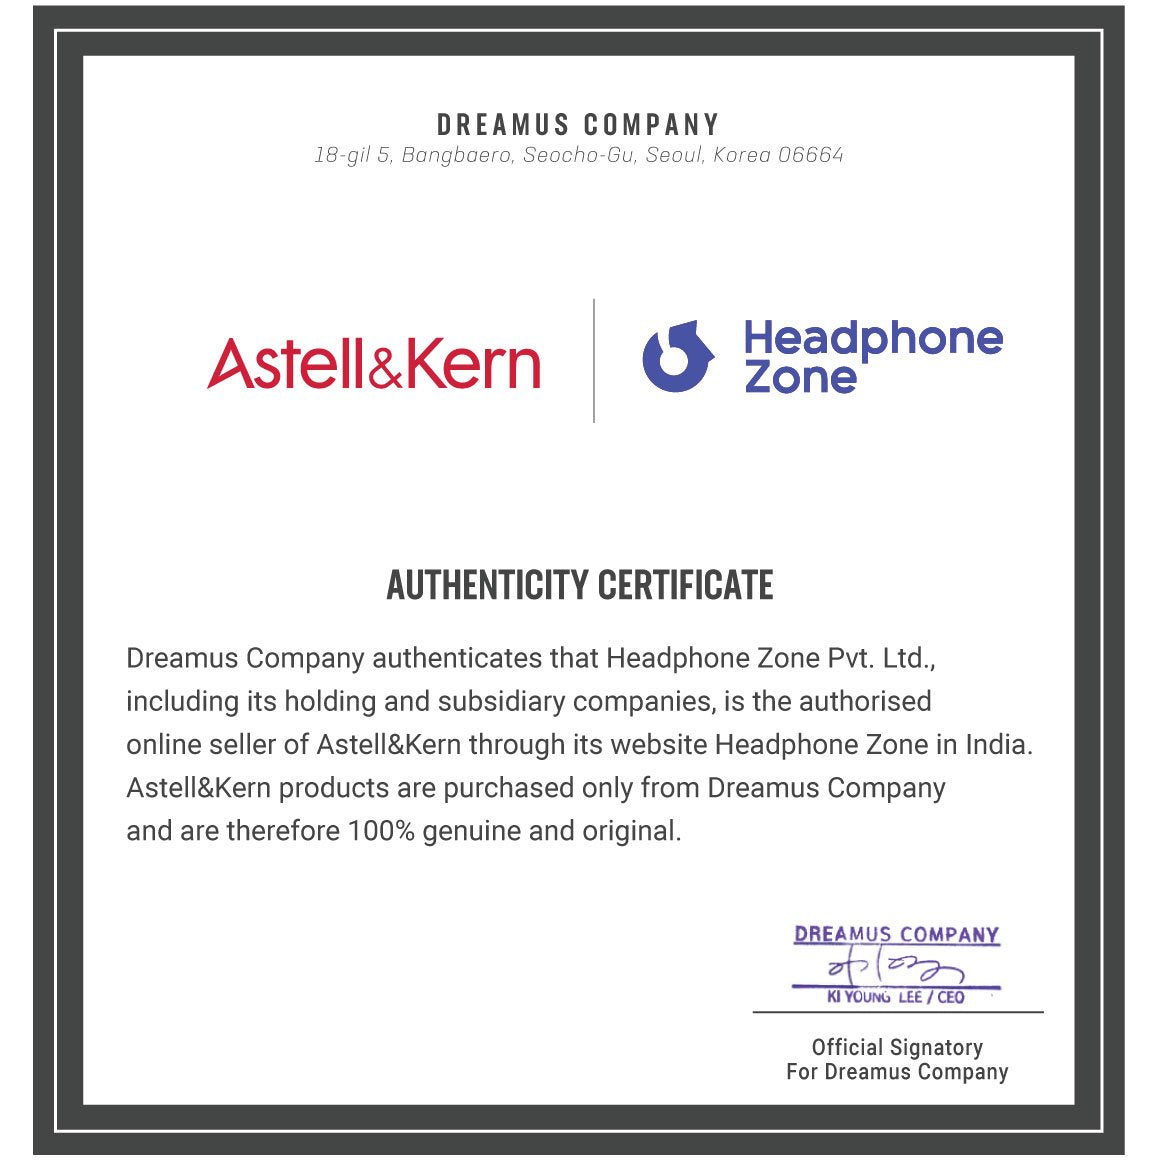 Headphne-Zone-Astell&Kern-AAuthenticity-Certificate